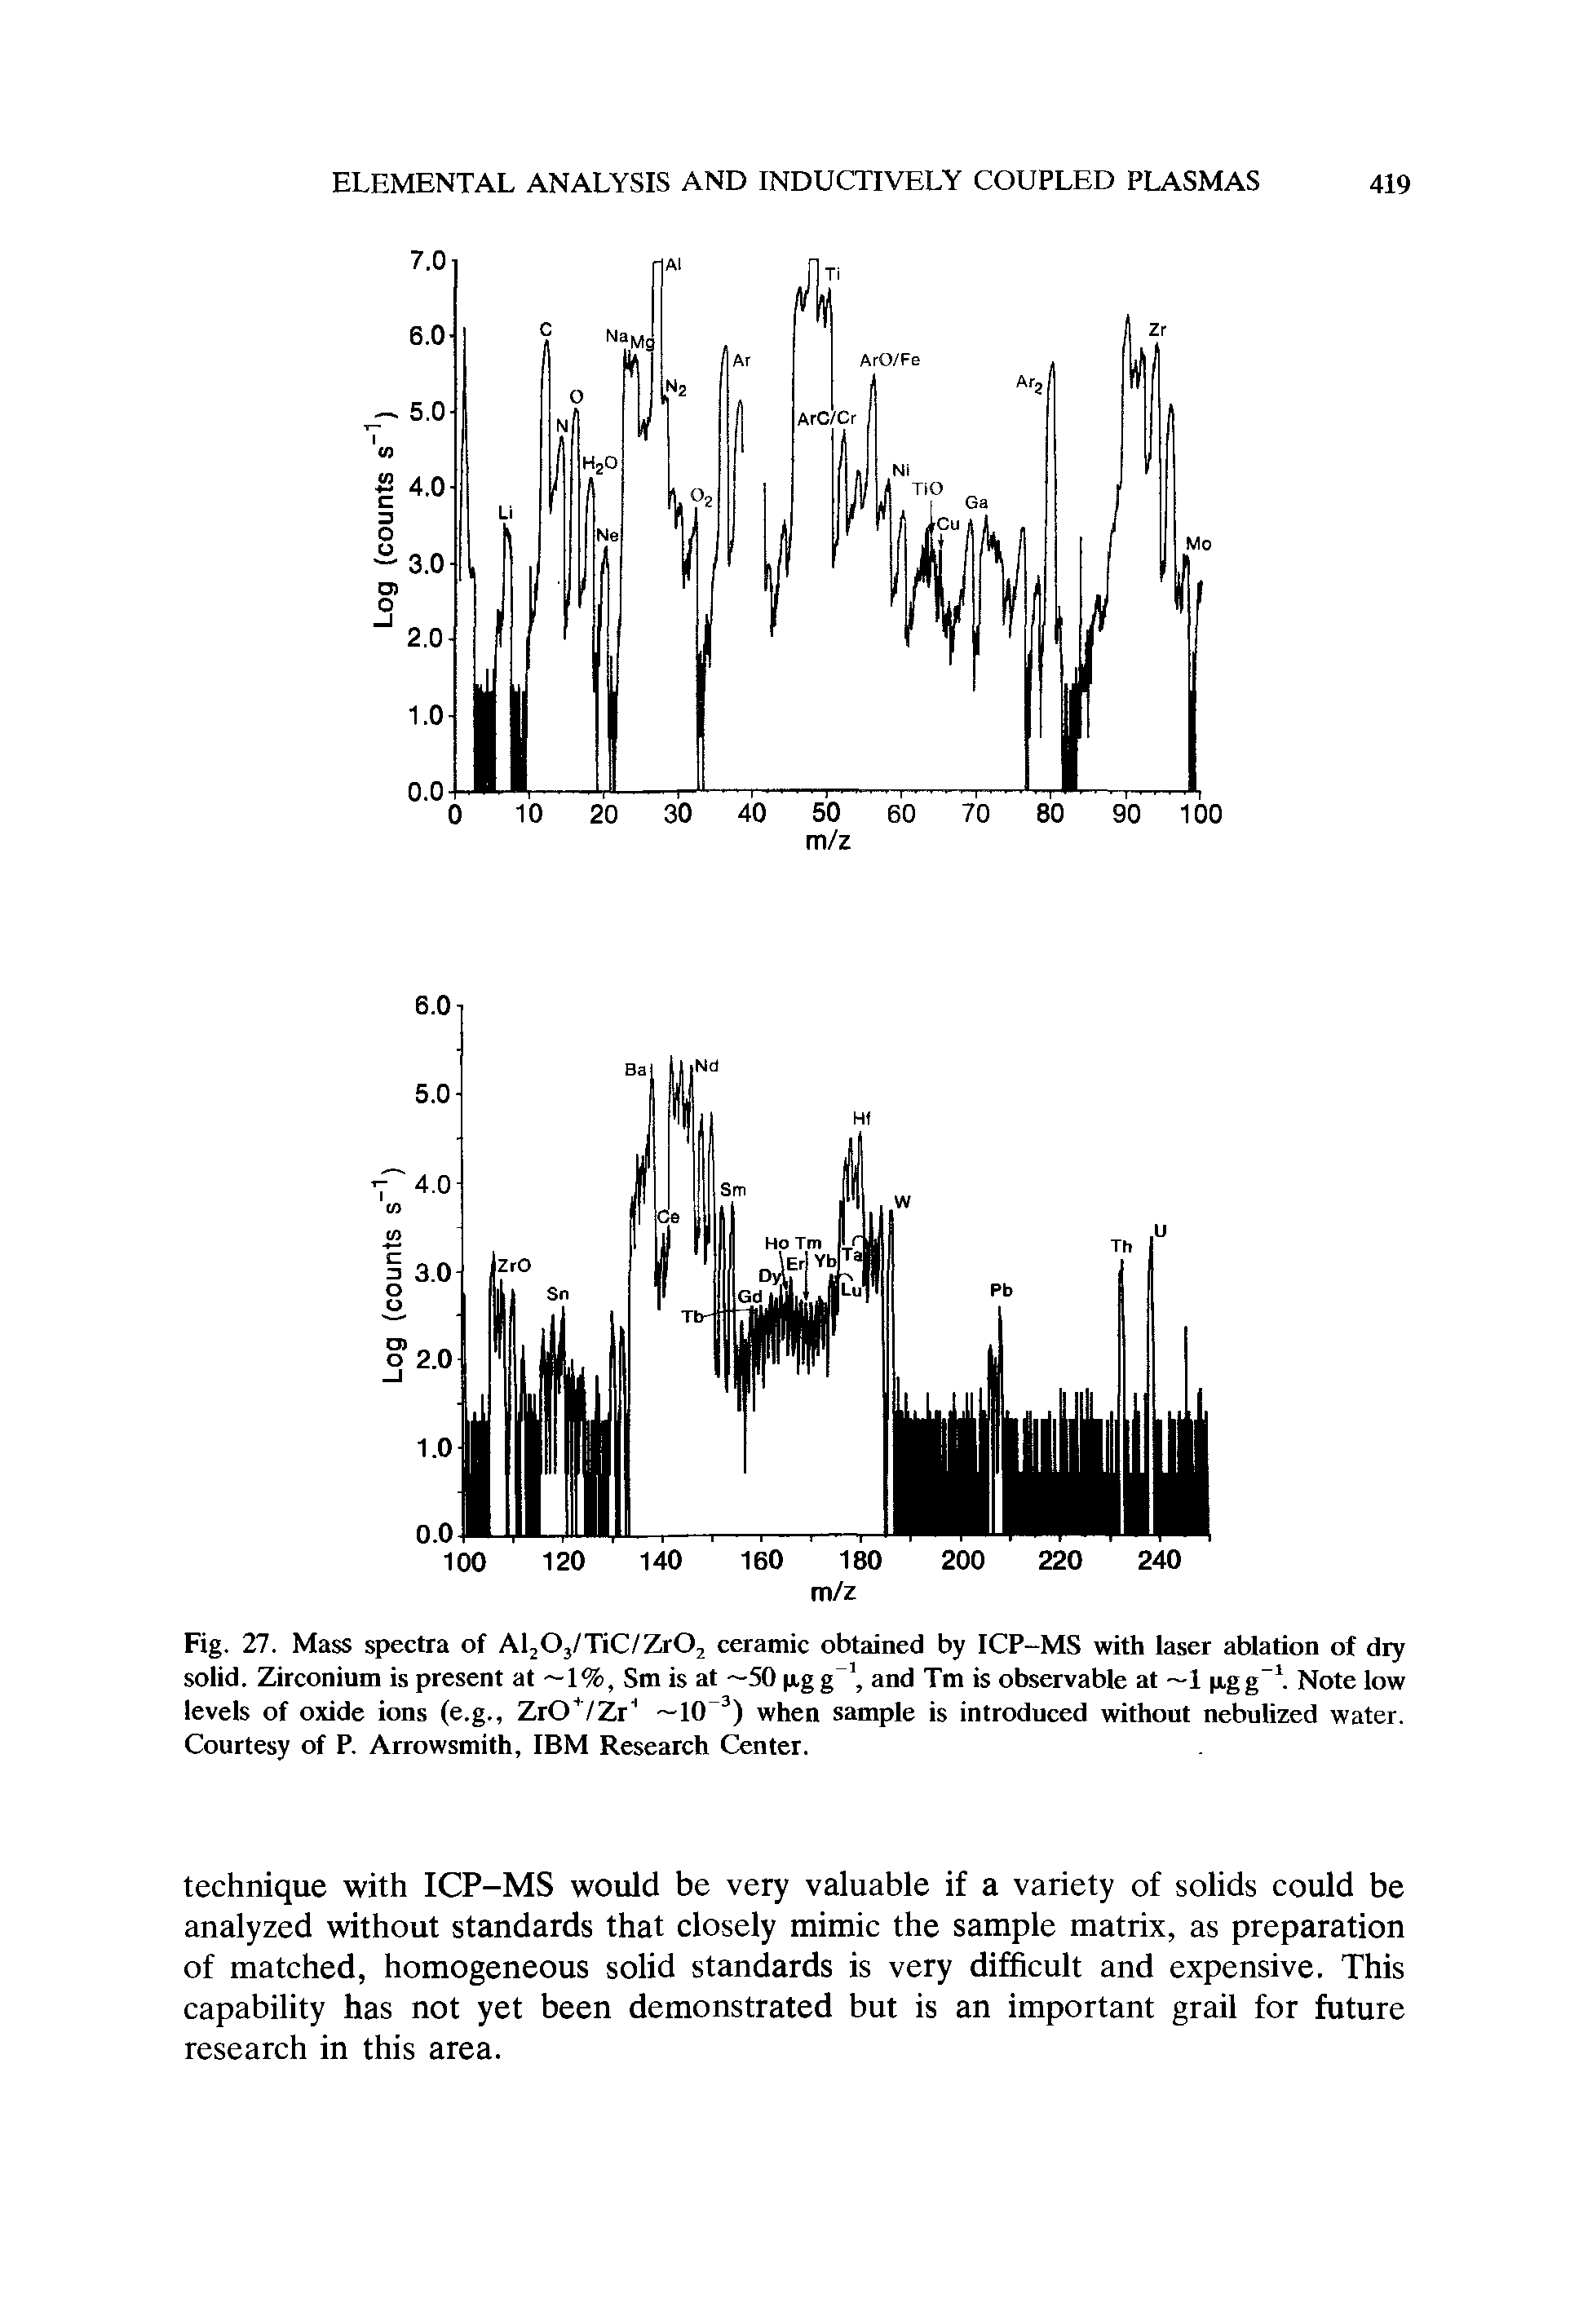 Fig. 27. Mass spectra of AljOj/TiC/ZrOj ceramic obtained by ICP-MS with laser ablation of dry solid. Zirconium is present at 1%, Sm is at 50 p.gg and Tm is observable at 1 p.gg Note low levels of oxide ions (e.g., ZrO /Zr —10 ) when sample is introdnced without nebulized water. Courtesy of P. Arrowsmith, IBM Research Center.